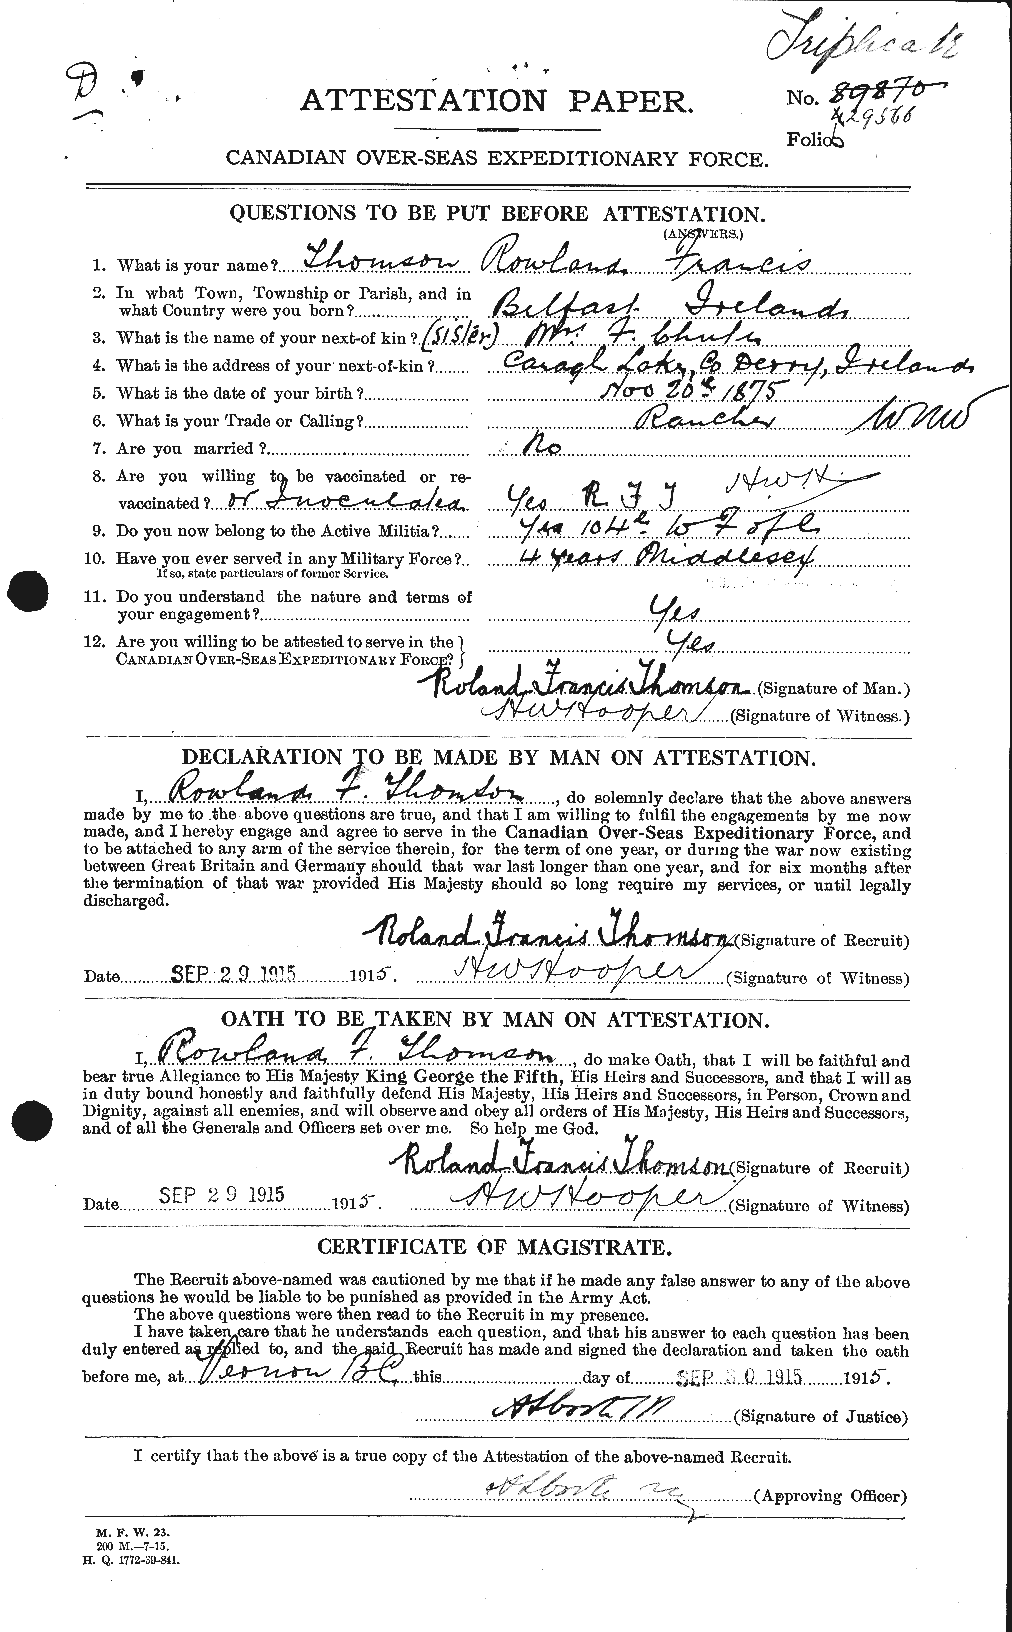 Personnel Records of the First World War - CEF 633534a